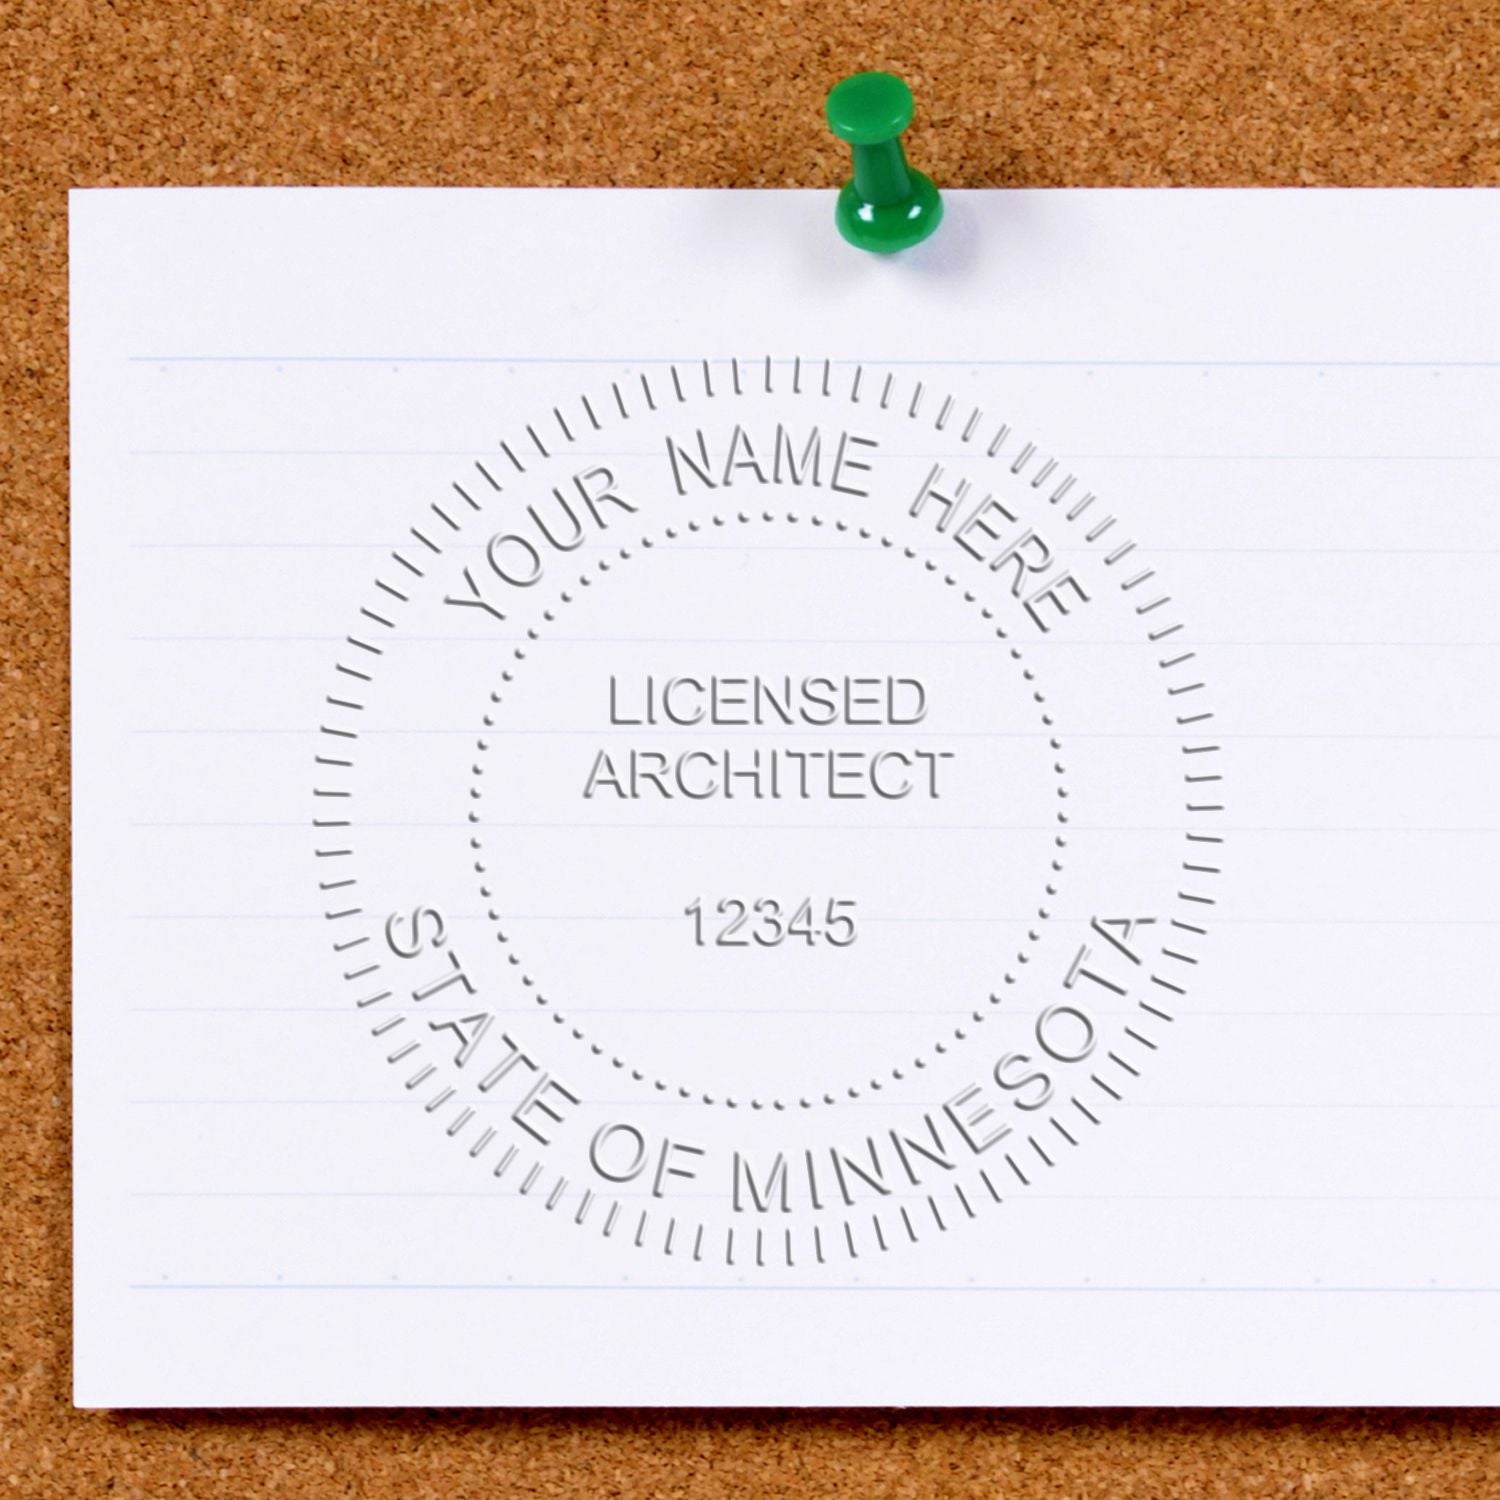 An alternative view of the Hybrid Minnesota Architect Seal stamped on a sheet of paper showing the image in use